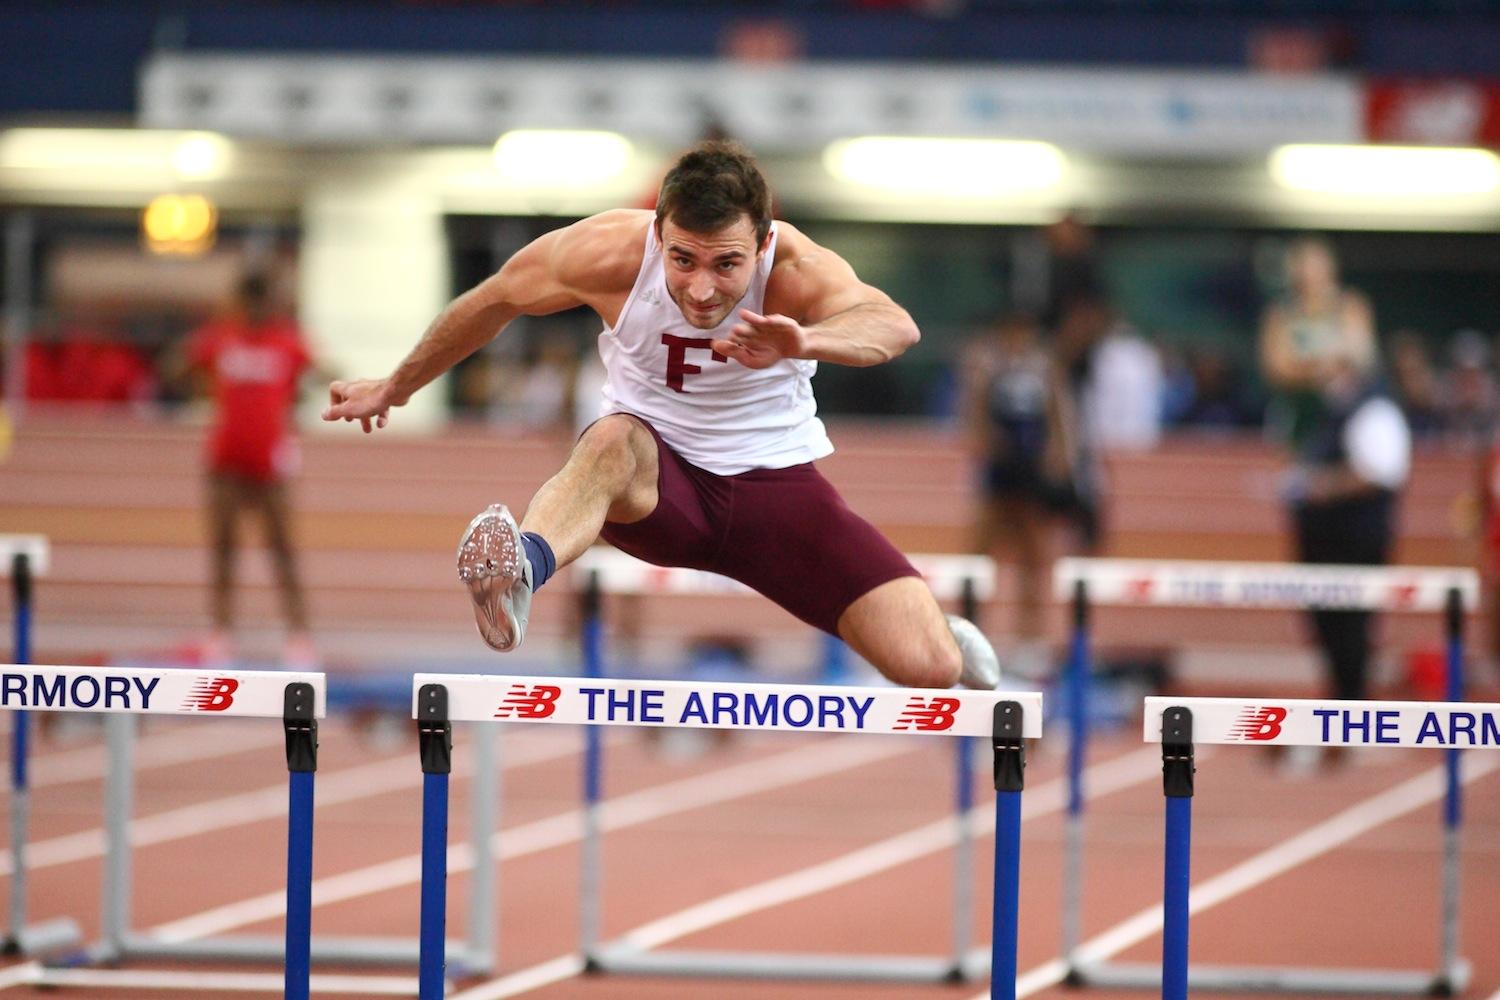 Sam Houston, FCRH ’14, earned Second Team All-Atlantic 10 honors with his second-place finish in the heptathlon. (Courtesy of Fordham Sports)